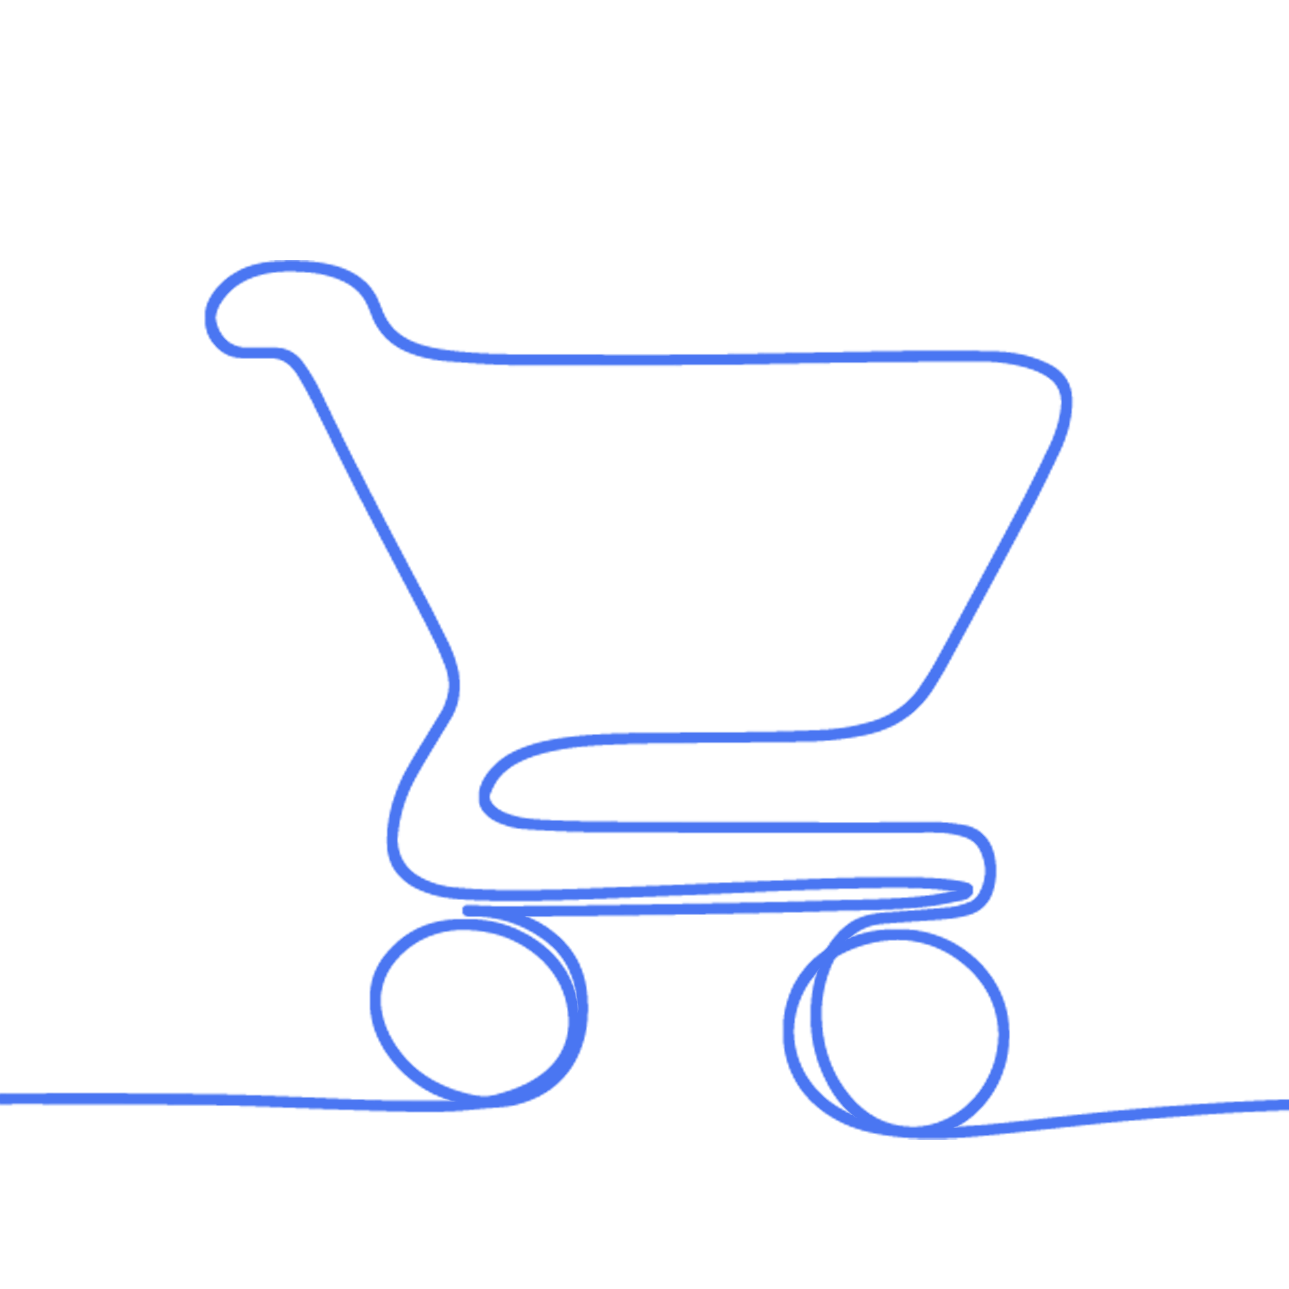 Shopping cart icon for consumer goods industry recruiting